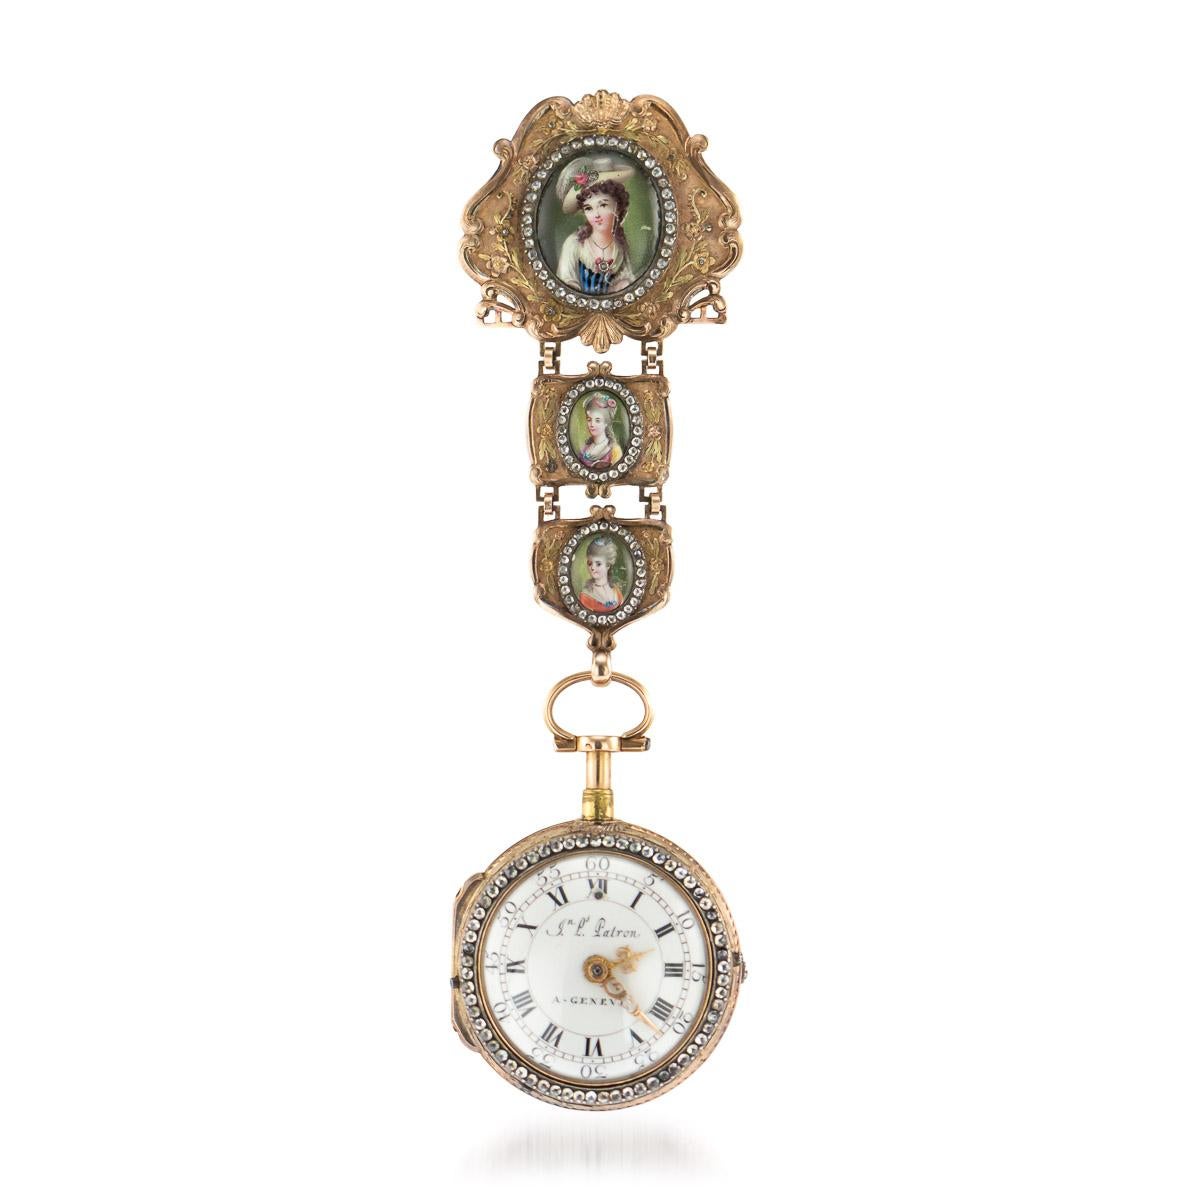 Antique 18th century Swiss highly rare and decorative 18-karat vari-coloured gold, hand painted enamel and diamond-set, open face verge watch with chatelaine. Gilt-finished verge movement, chain fusée, the removable watch case centred with a hand